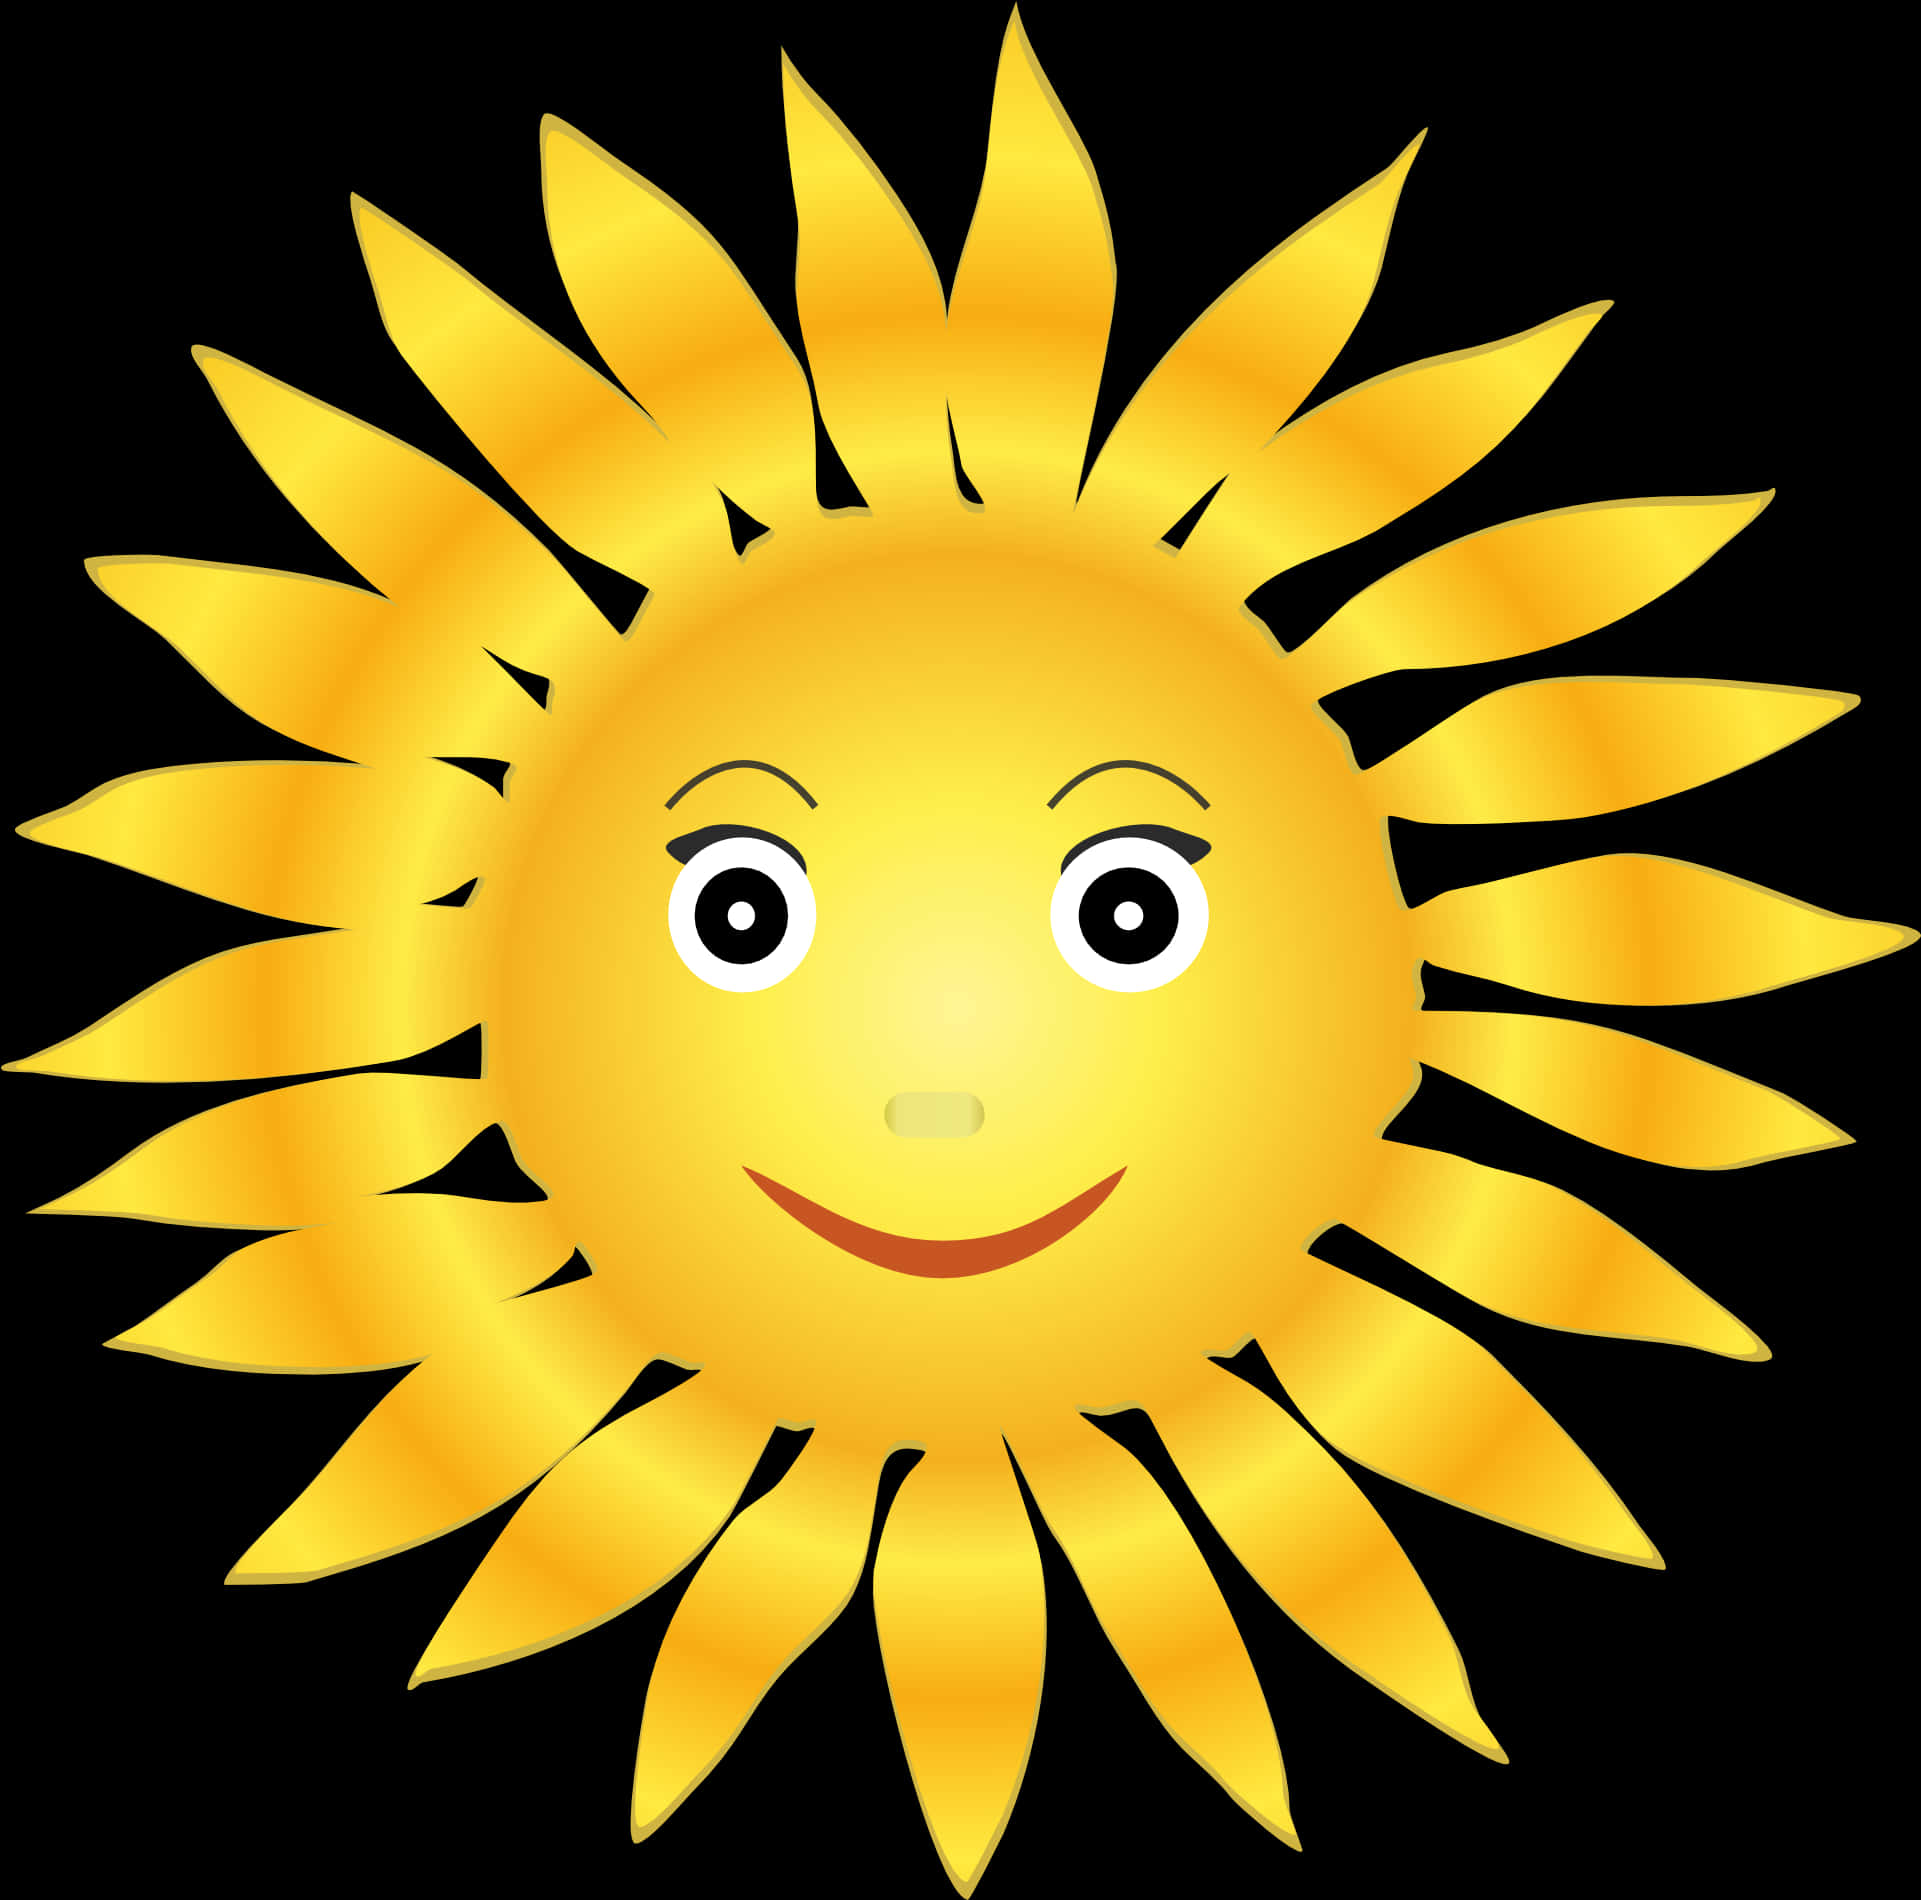 A Yellow Sun With A Smiling Face